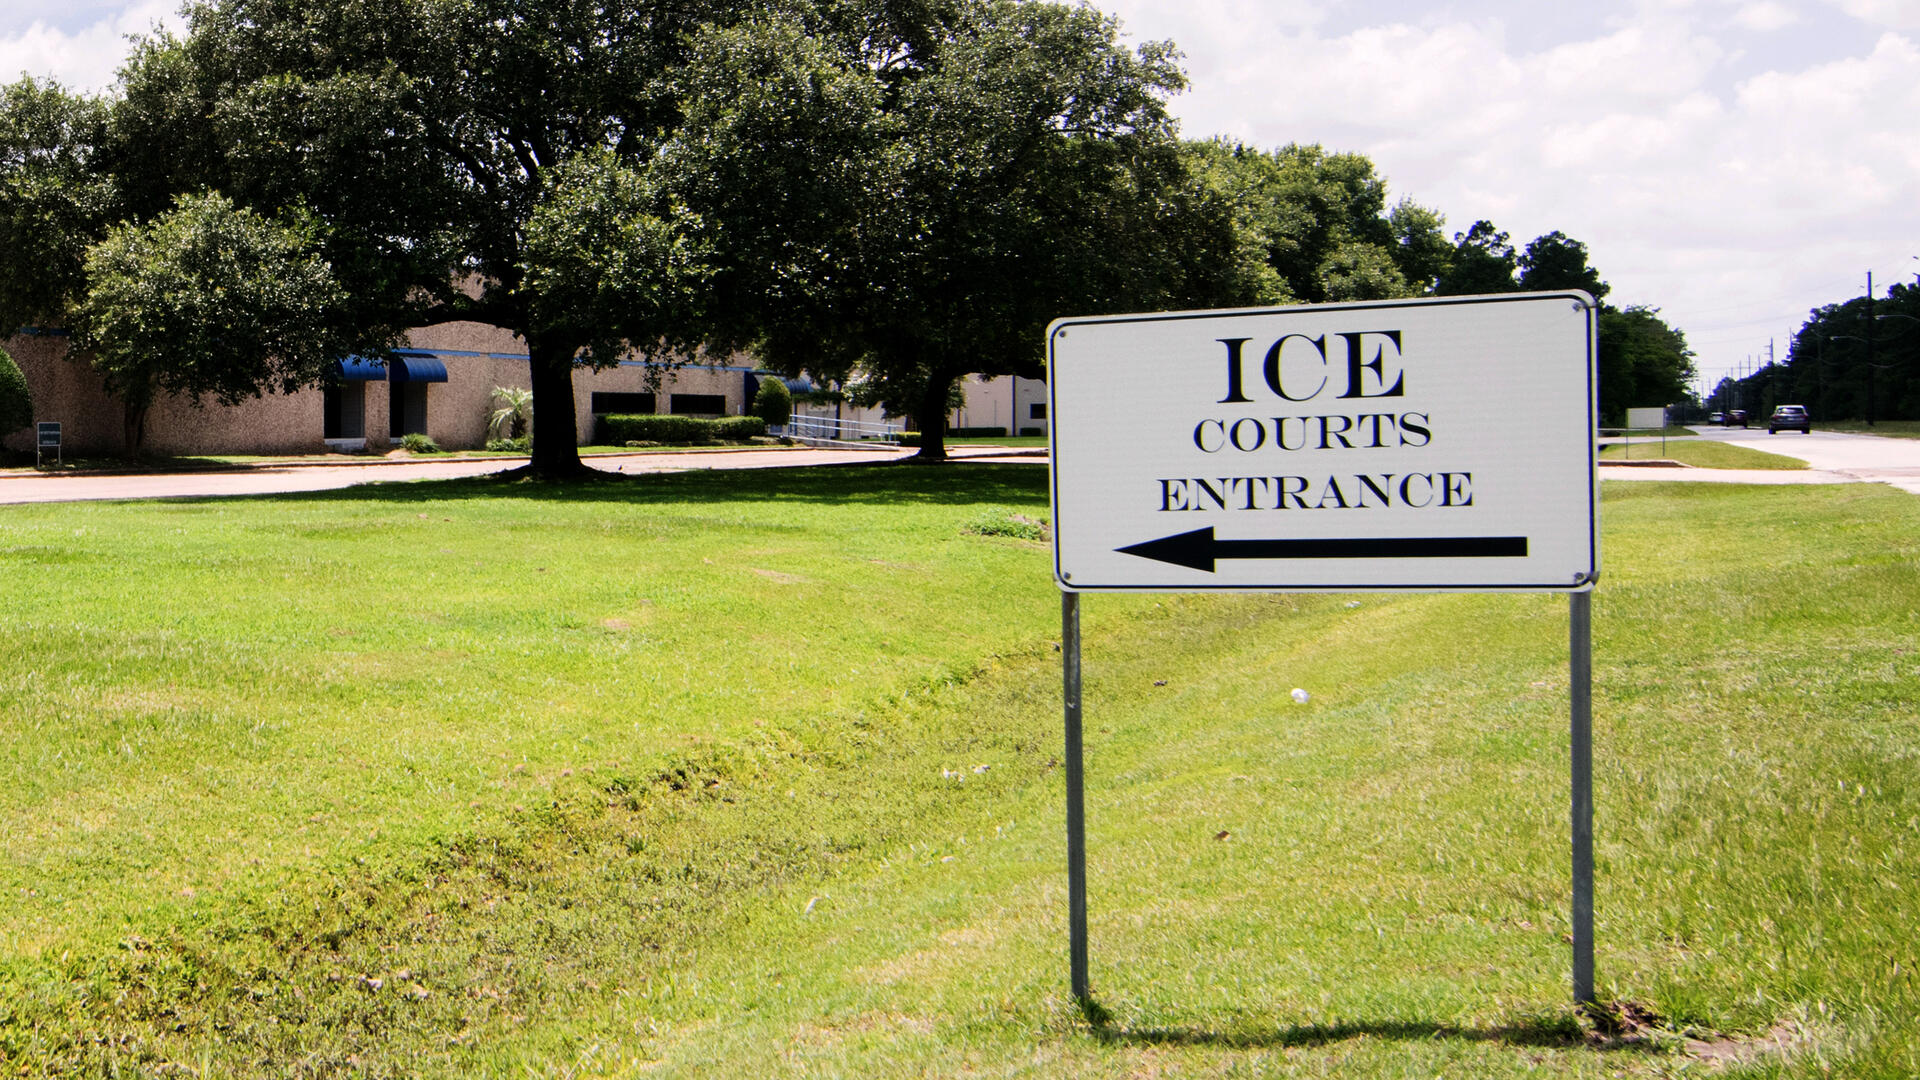 A lawn with a black and white sign that says "ICE Courts Entrance"